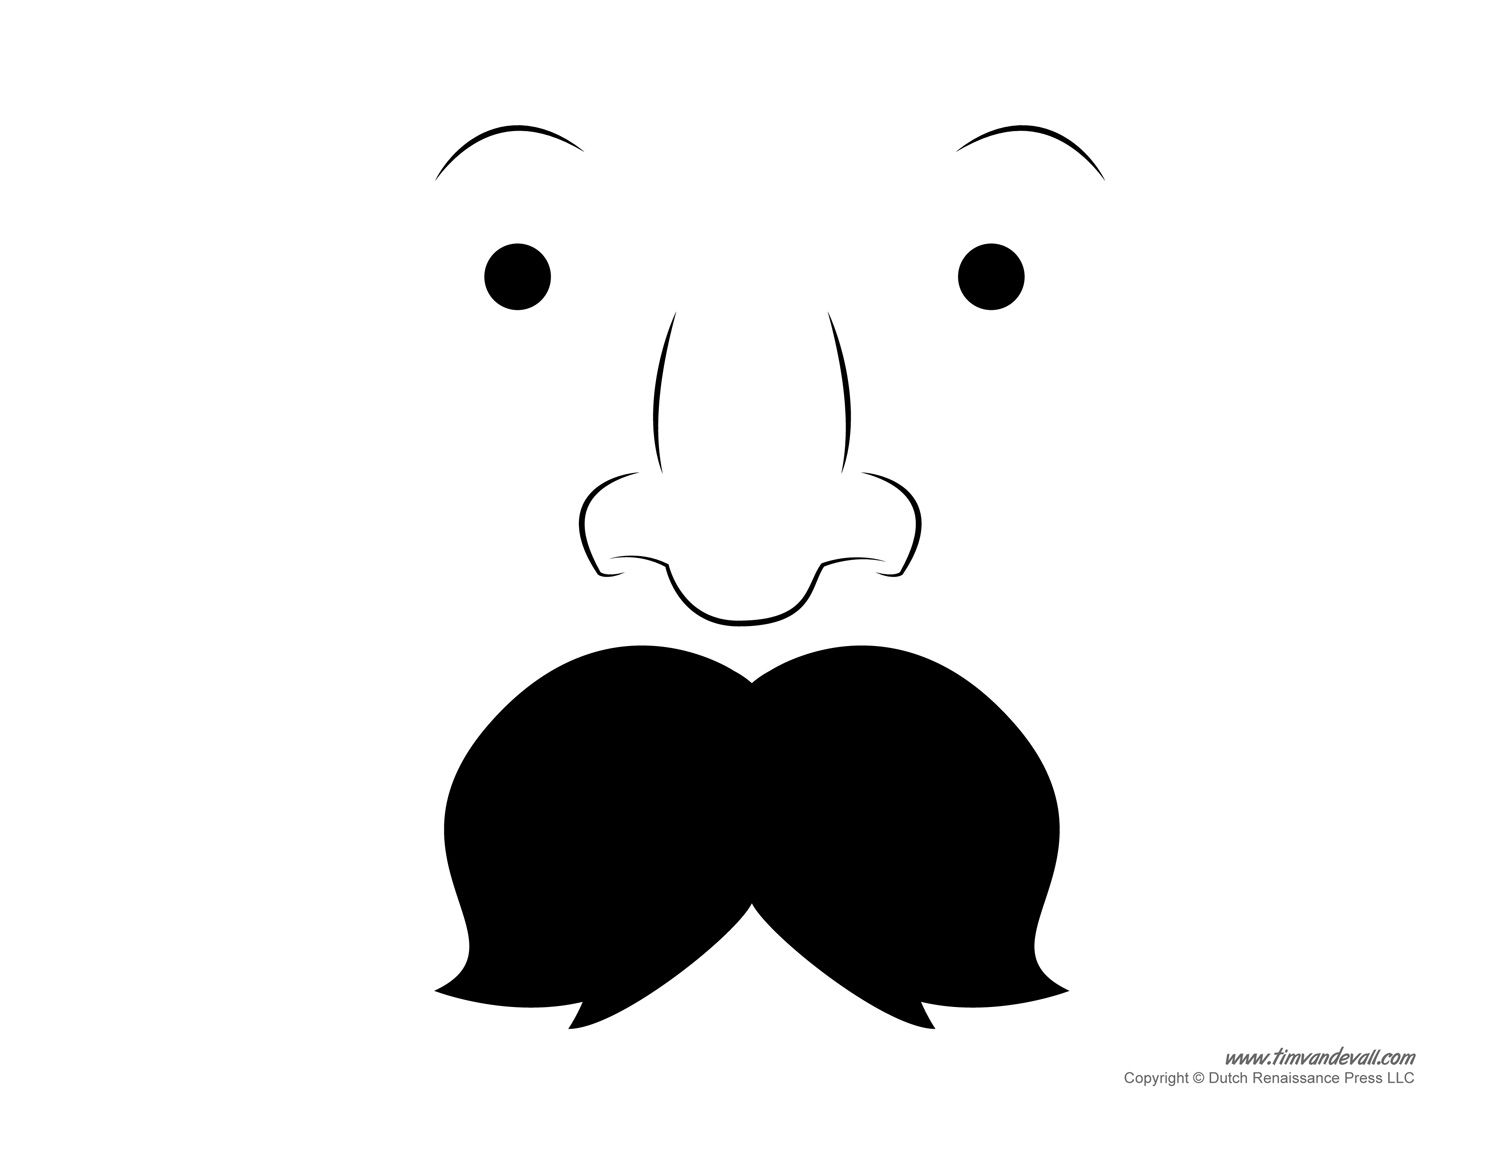 Printable Mustache Templates | Mustaches for Kids